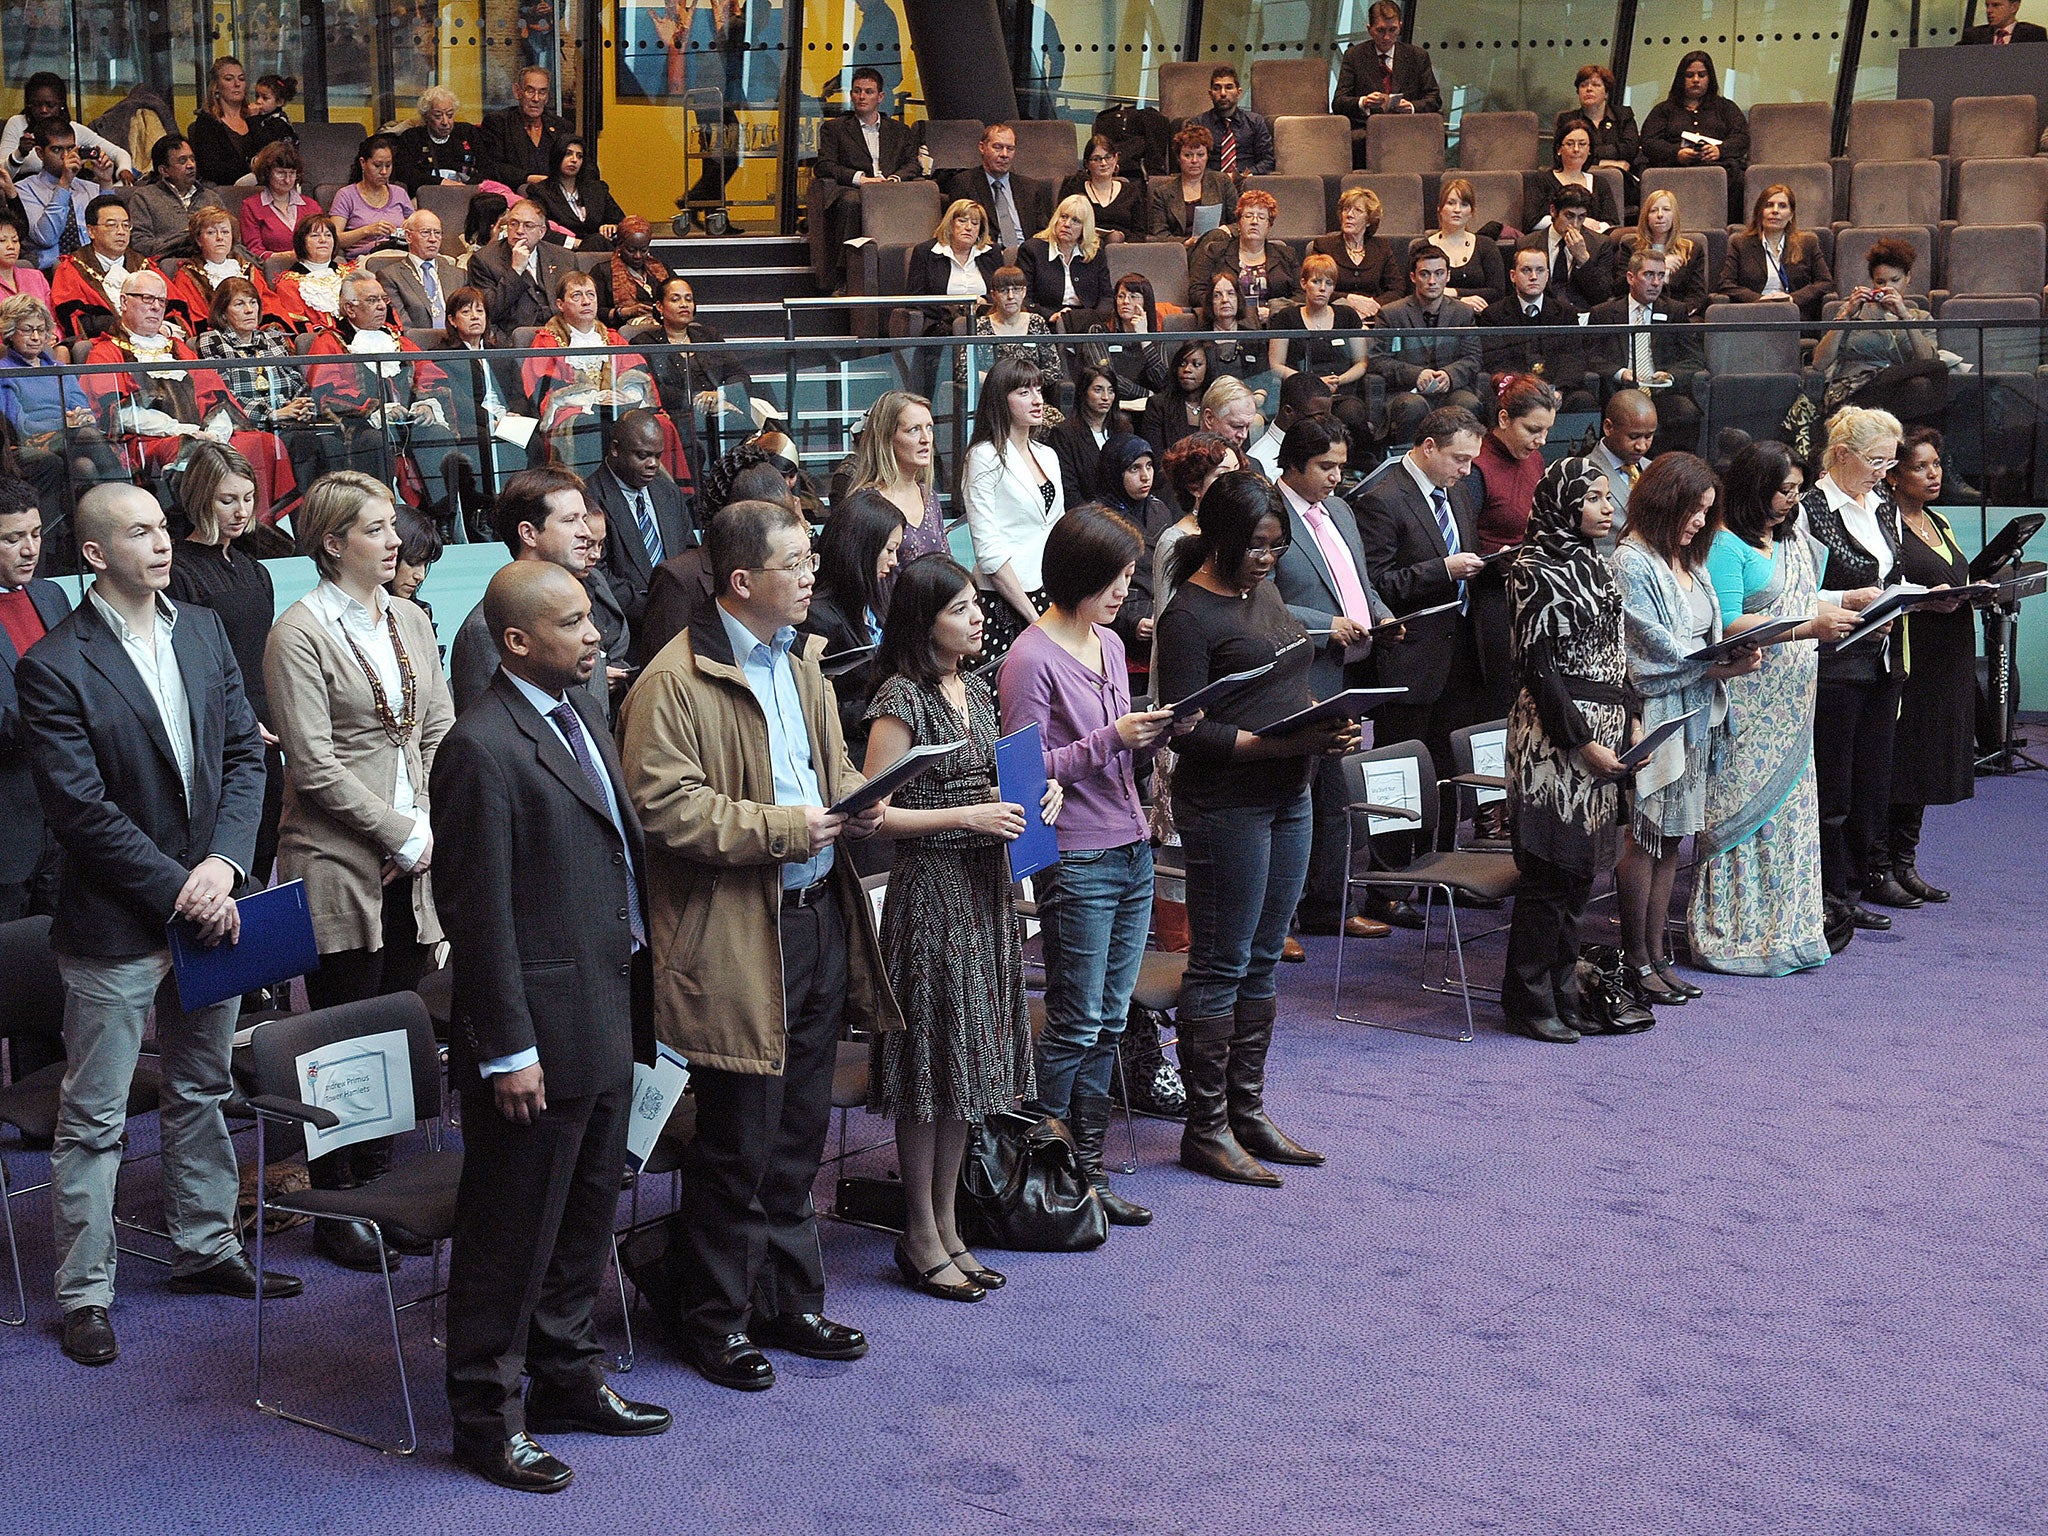 Immigrants to the UK take an oath before being presented with a certificate of citizenship during a 'Citizenship Ceremony' at City Hall, London